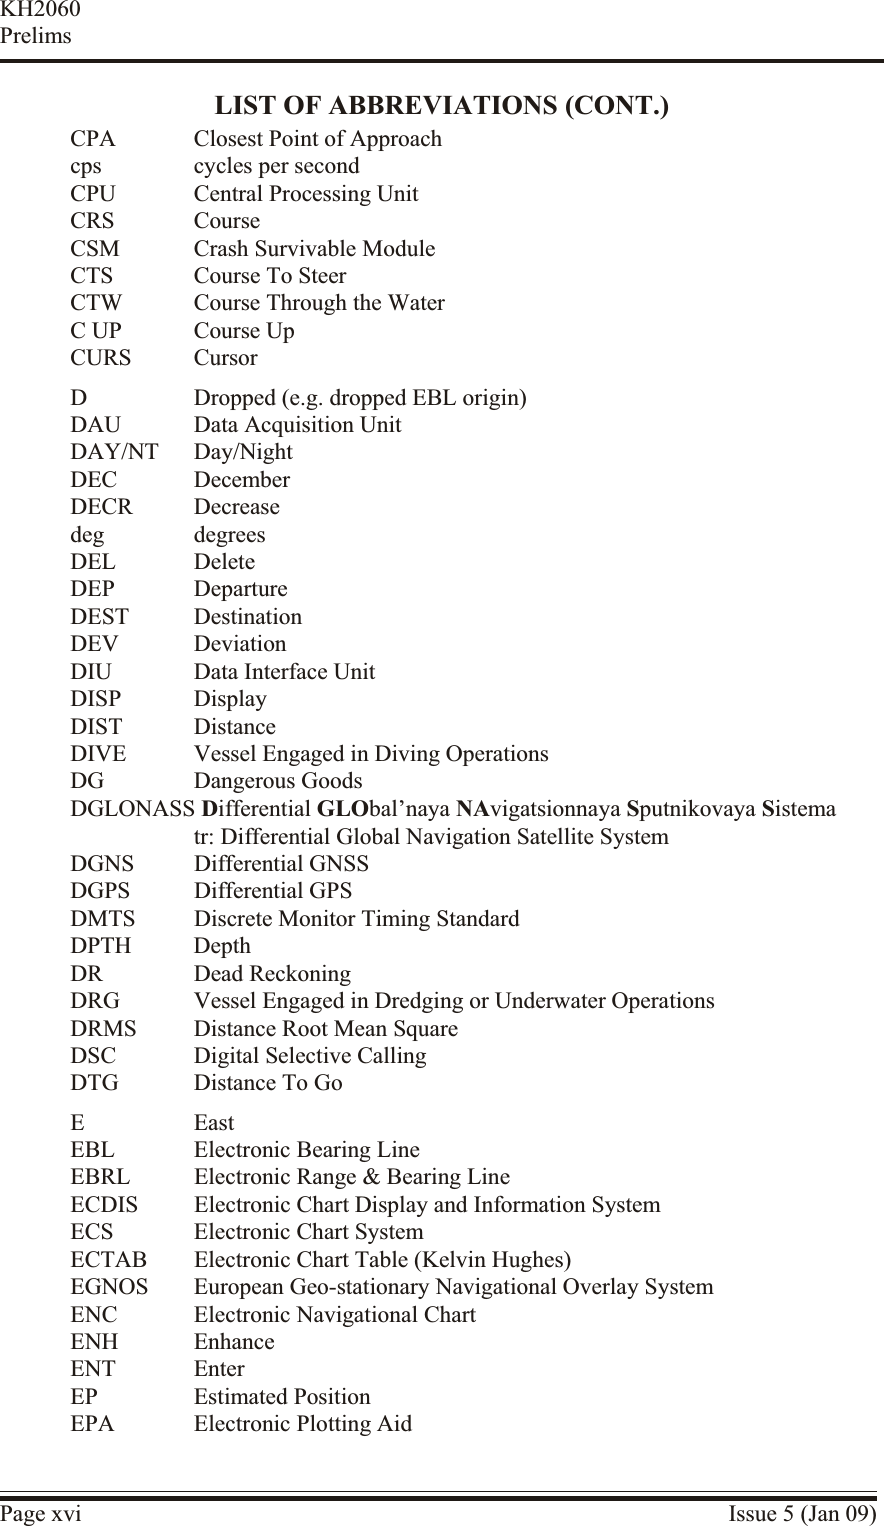 LIST OF ABBREVIATIONS (CONT.)CPA Closest Point of Approachcps cycles per secondCPU Central Processing UnitCRS CourseCSM Crash Survivable ModuleCTS Course To SteerCTW Course Through the WaterC UP Course UpCURS CursorD Dropped (e.g. dropped EBL origin)DAU Data Acquisition UnitDAY/NT Day/NightDEC DecemberDECR Decreasedeg degreesDEL DeleteDEP DepartureDEST DestinationDEV DeviationDIU Data Interface UnitDISP DisplayDIST DistanceDIVE Vessel Engaged in Diving OperationsDG Dangerous GoodsDGLONASS Differential GLObal’naya NAvigatsionnaya Sputnikovaya Sistematr: Differential Global Navigation Satellite SystemDGNS Differential GNSSDGPS Differential GPSDMTS Discrete Monitor Timing StandardDPTH DepthDR Dead ReckoningDRG Vessel Engaged in Dredging or Underwater OperationsDRMS Distance Root Mean SquareDSC Digital Selective CallingDTG Distance To GoE EastEBL Electronic Bearing LineEBRL Electronic Range &amp; Bearing LineECDIS Electronic Chart Display and Information SystemECS Electronic Chart SystemECTAB Electronic Chart Table (Kelvin Hughes)EGNOS European Geo-stationary Navigational Overlay SystemENC Electronic Navigational ChartENH EnhanceENT EnterEP Estimated PositionEPA Electronic Plotting AidPage xvi Issue 5 (Jan 09)KH2060Prelims